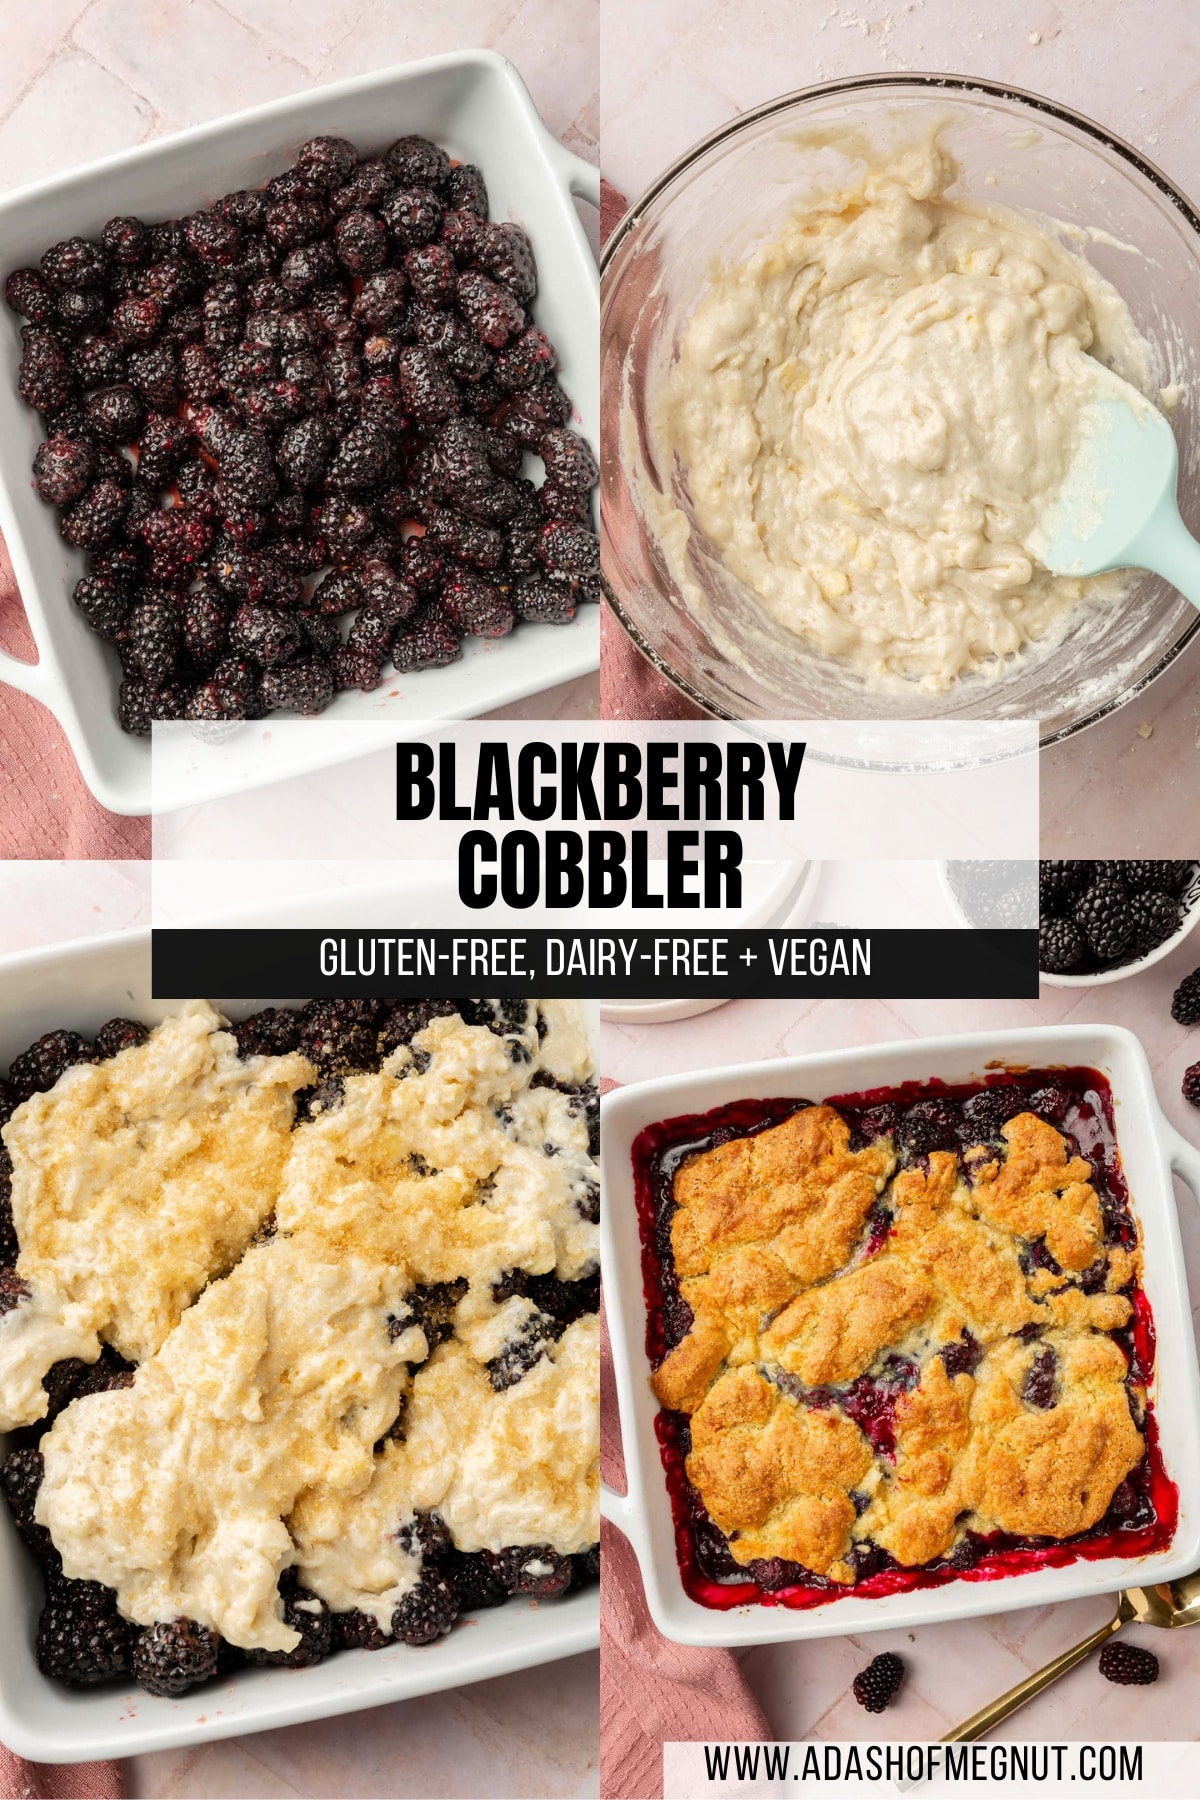 A four photo collage showing the process of making gluten free blackberry cobbler. Photo 1: Blackberries tossed in lemon juice and sugar in a square baking dish. Photo 2: A glass mixing bowl of gluten-free cobbler batter and a blue spatula. Photo 3: Blackberries in a baking dish topped with gluten-free cobbler batter and turbinado sugar before baking in the oven. Photo 4: Baked gluten free blackberry cobbler in a white square baking dish.